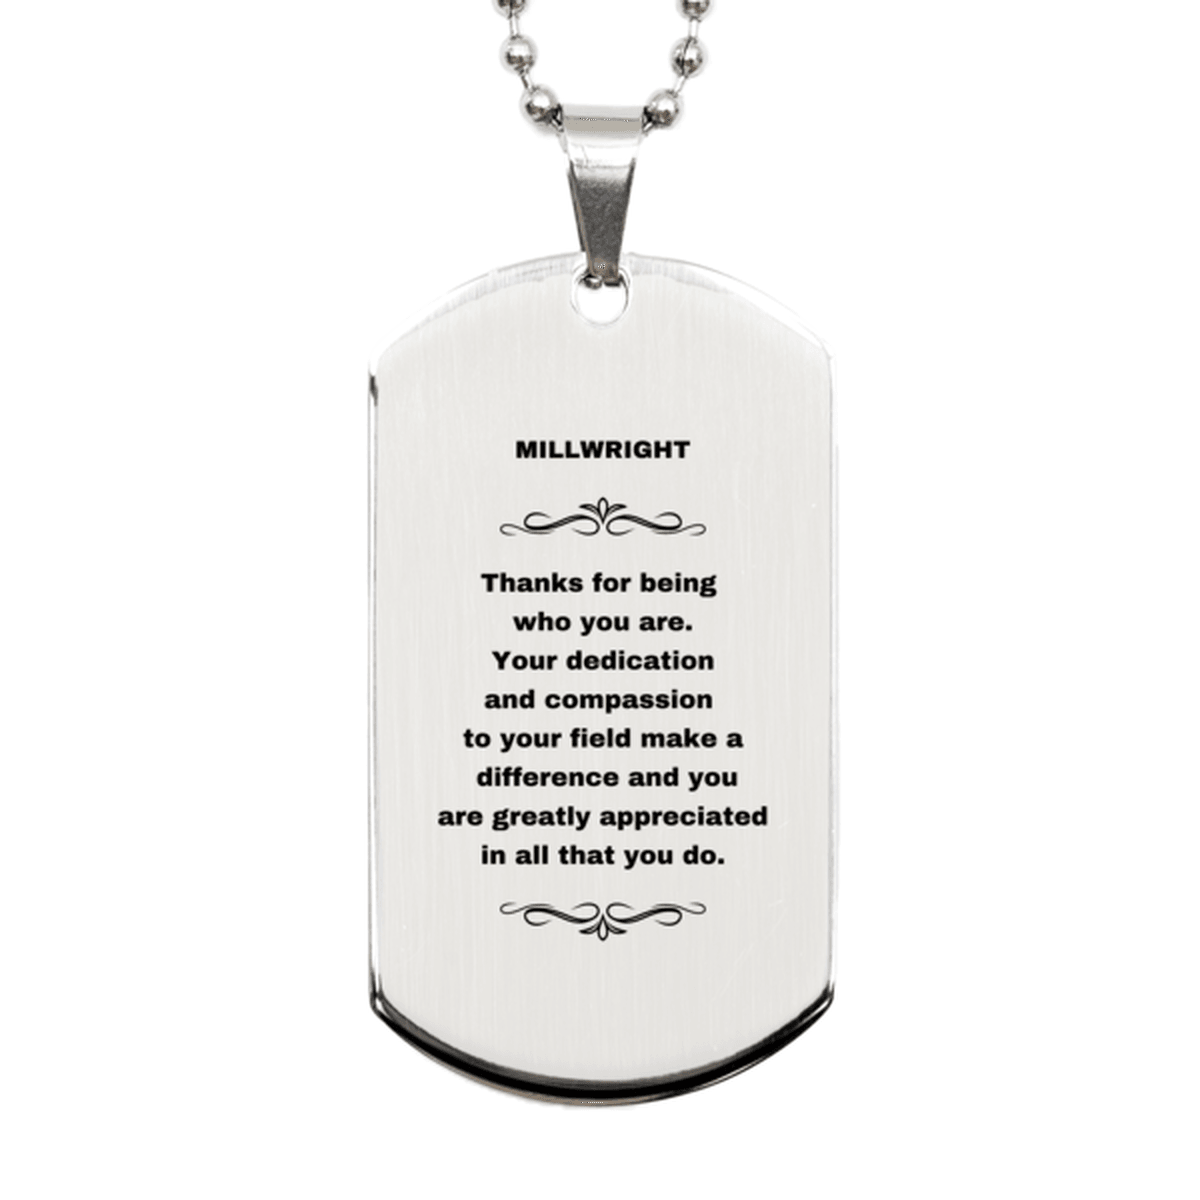 Millwright Silver Dog Tag Necklace - Thanks for being who you are - Birthday Christmas Jewelry Gifts Coworkers Colleague Boss - Mallard Moon Gift Shop